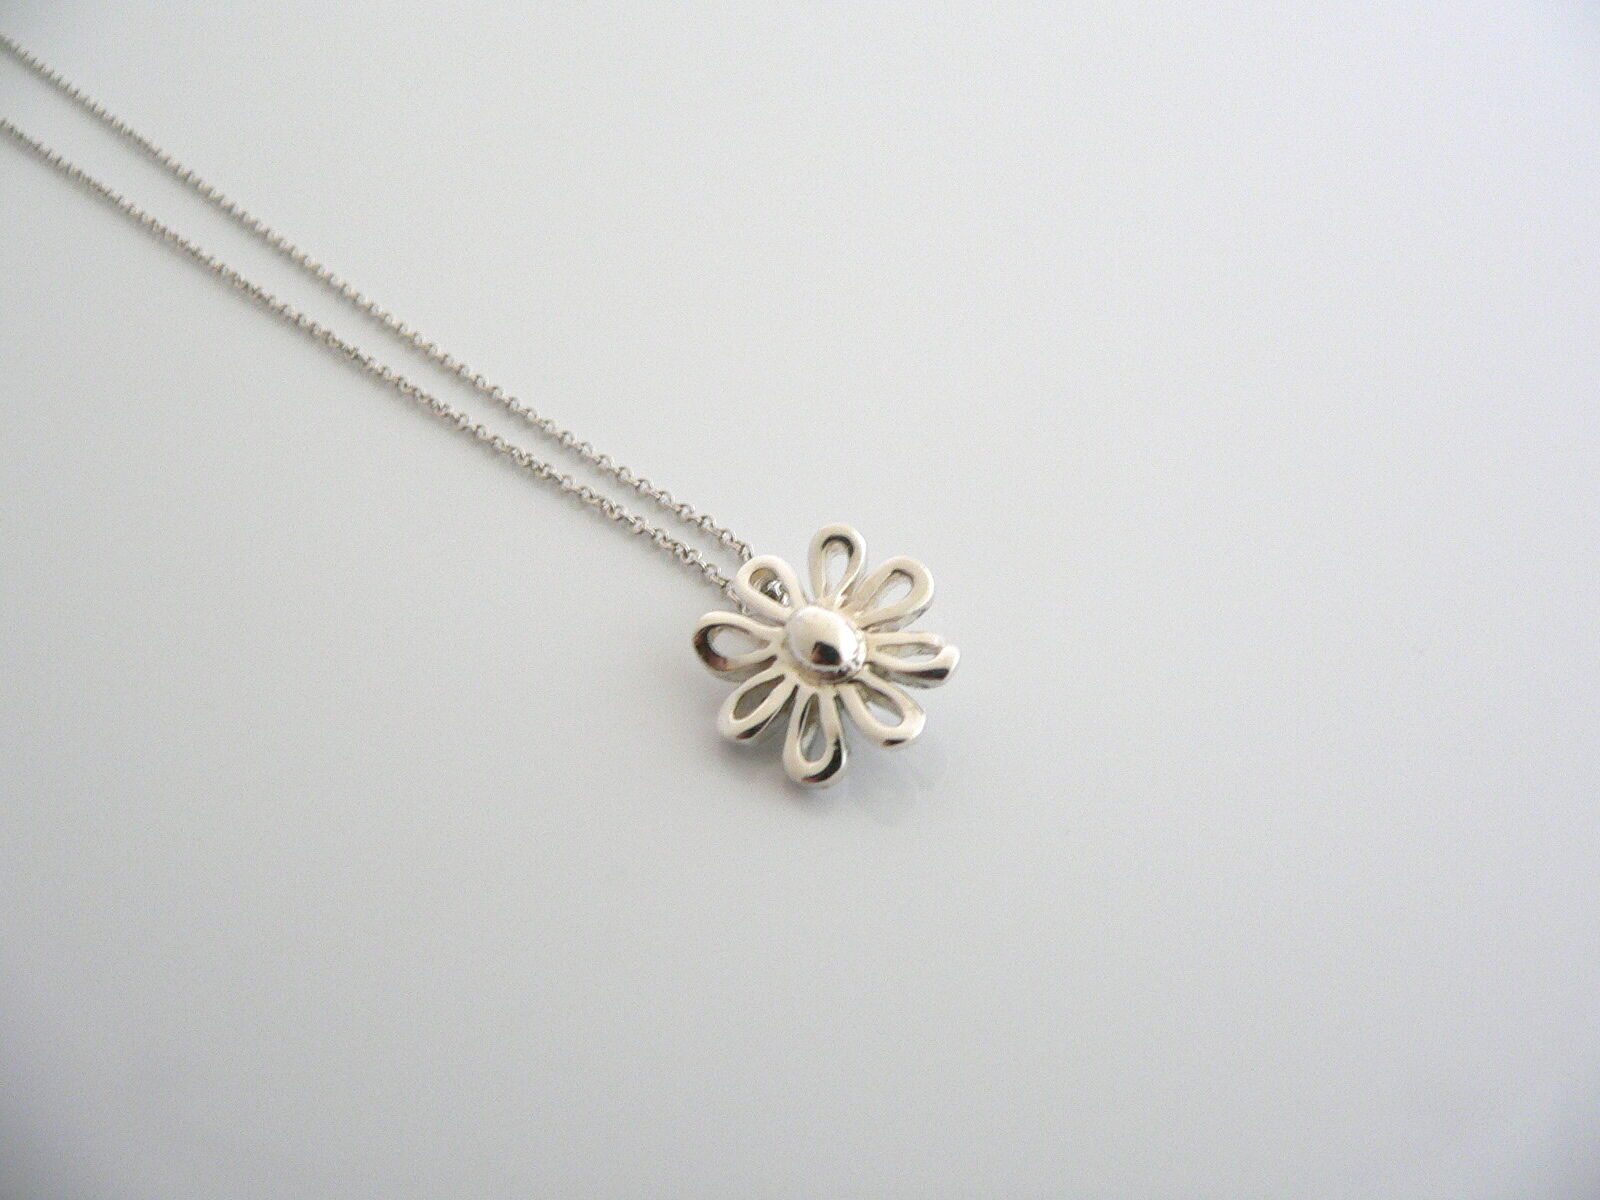 Tiffany & Co Picasso Daisy Flower Pendant Necklace Chain Charm Silver Gift Love